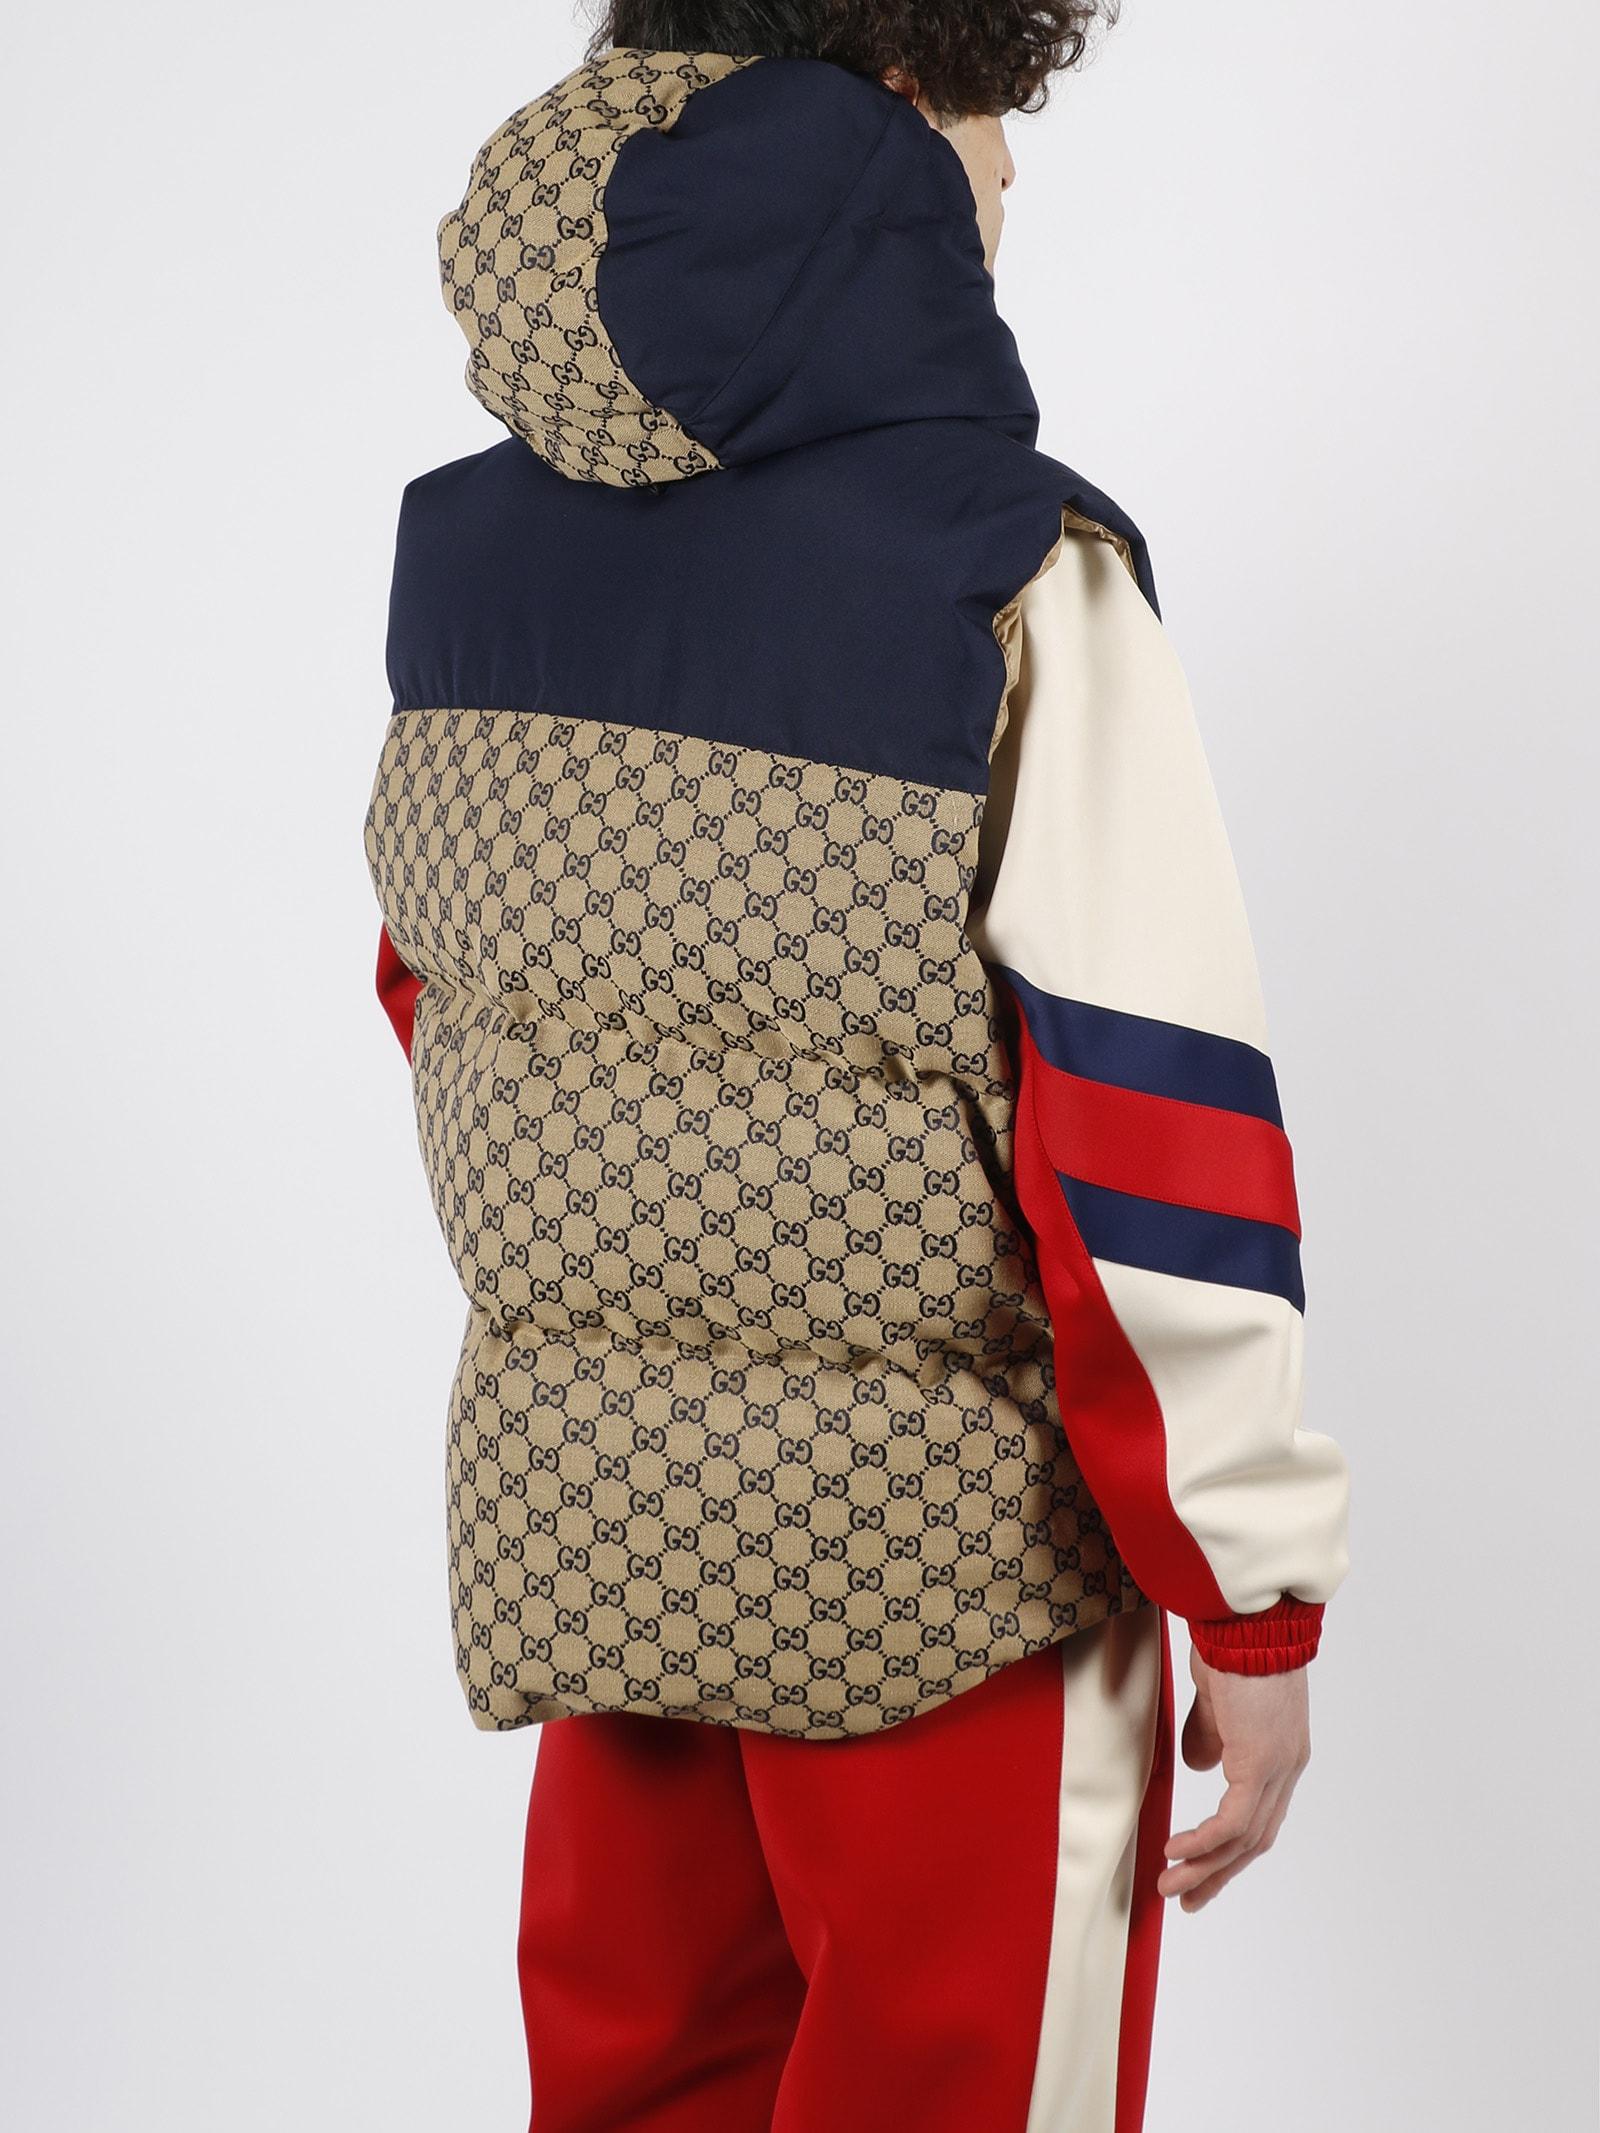 GG canvas down vest with detachable hood in beige and blue